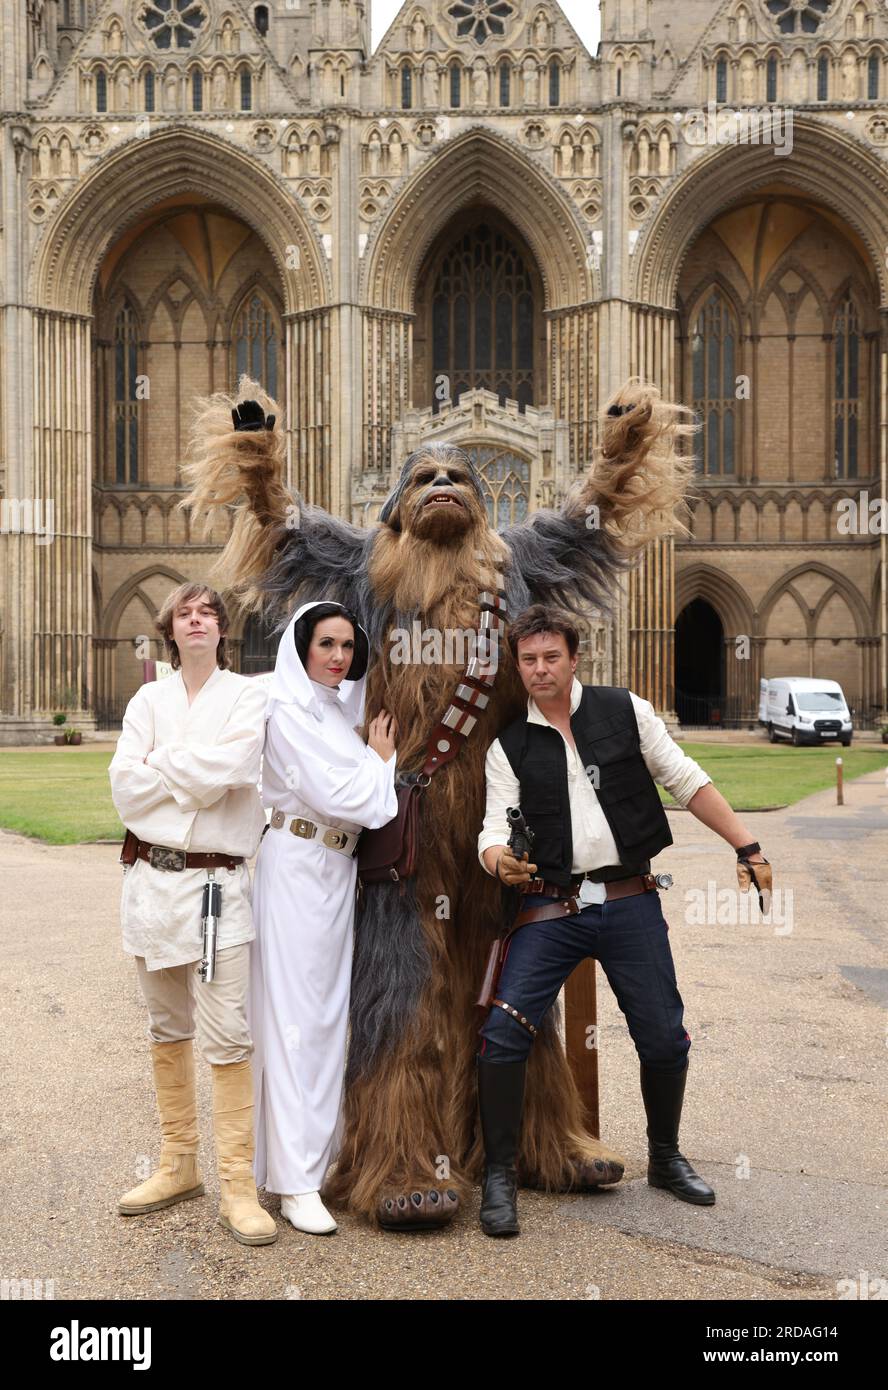 https://c8.alamy.com/comp/2RDAG14/peterborough-uk-18th-july-2023-luke-skywalker-princess-leia-chewbacca-and-han-solo-pose-outside-peterborough-cathedral-before-one-of-the-largest-star-wars-private-fan-collections-in-the-world-can-be-seen-in-the-magnificent-peterborough-cathedral-from-19th-july-the-exhibition-unofficial-galaxies-at-peterborough-cathedral-includes-over-120-exhibits-with-a-life-sized-land-speeder-amongst-on-show-alongside-rare-star-wars-toys-and-items-peterborough-cambridgeshire-uk-credit-paul-marriottalamy-live-news-2RDAG14.jpg